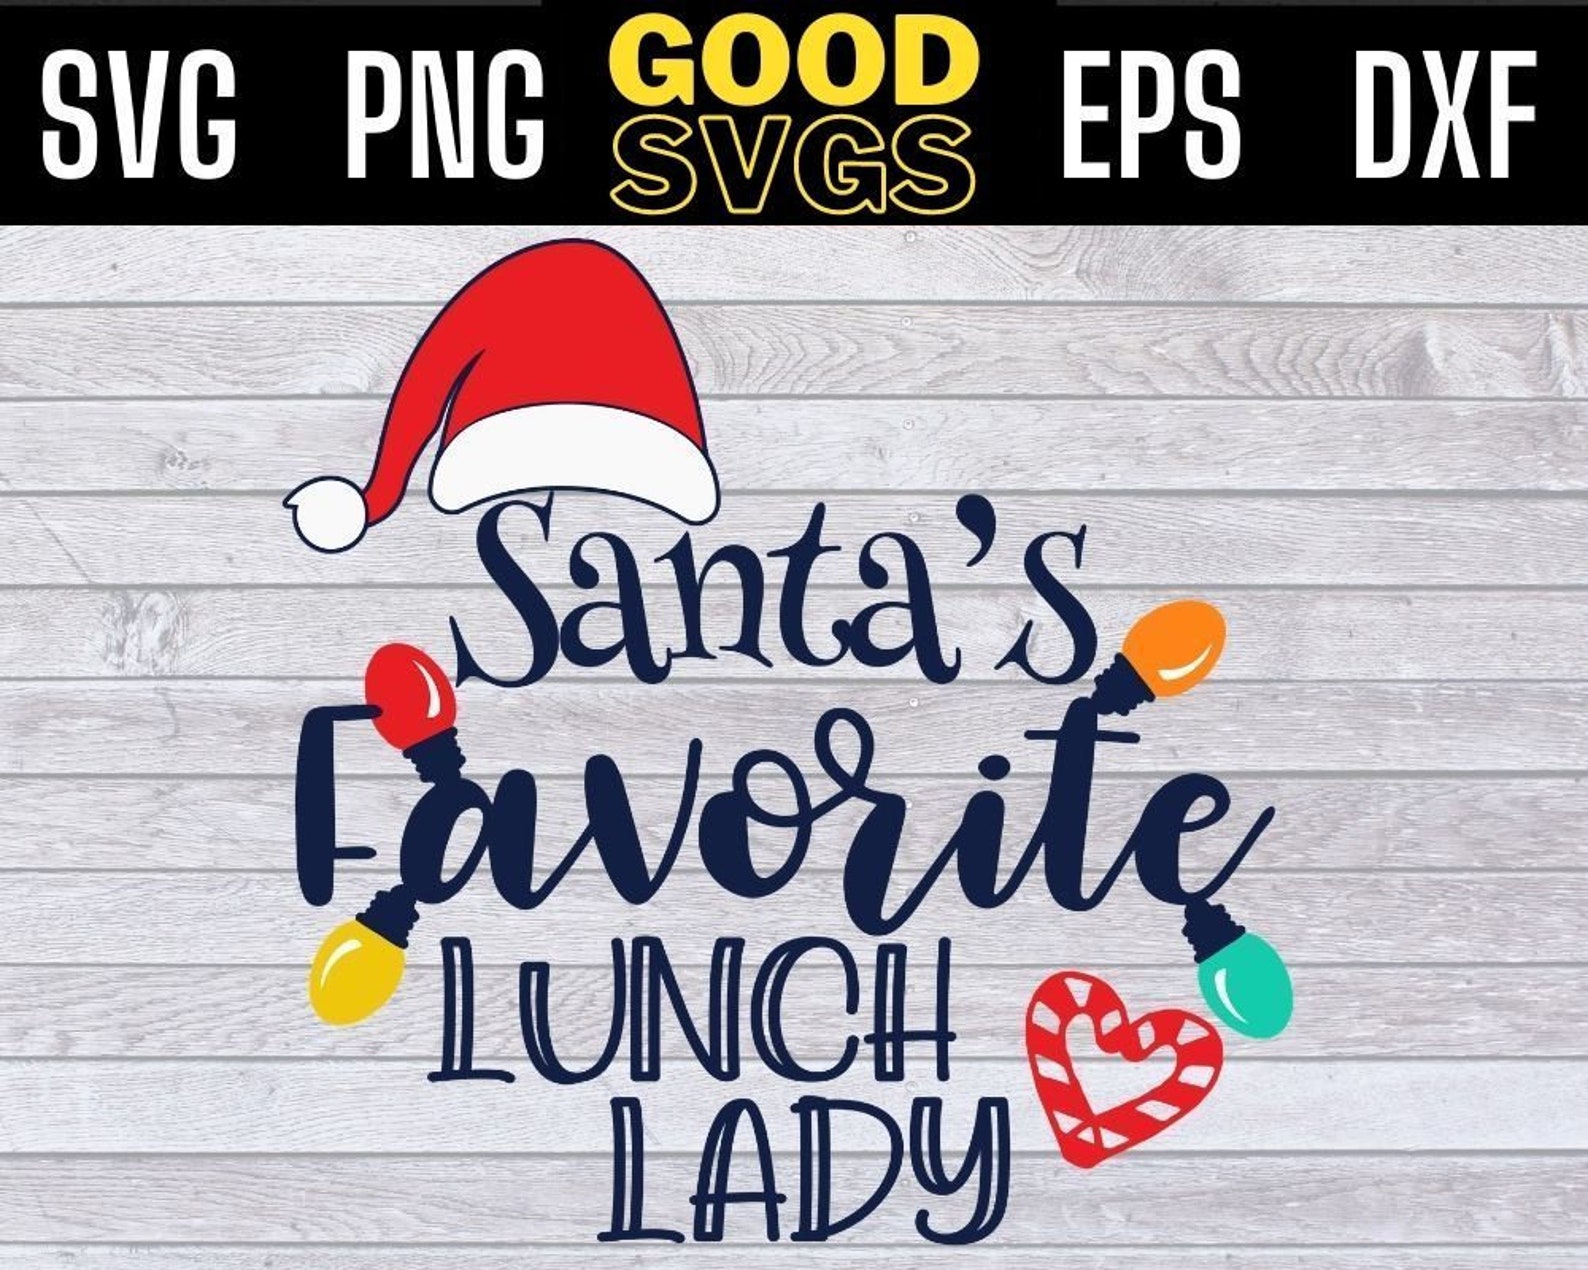 Santas Favorite Lunch Lady Svg Png Eps Dxf Lunch Lady | Etsy